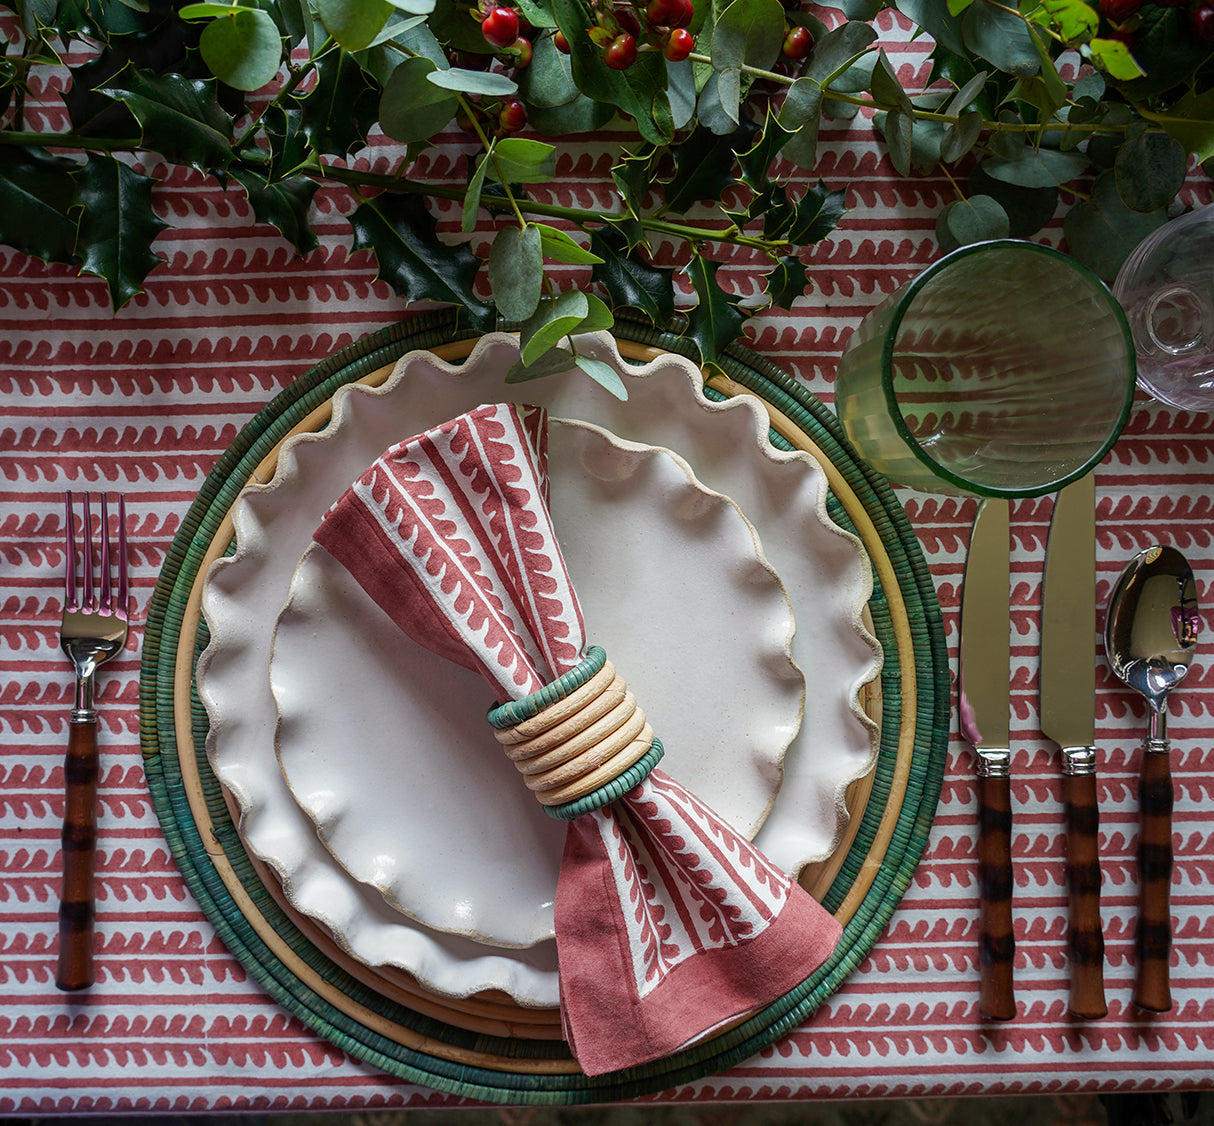 Festive Favourites for the Table